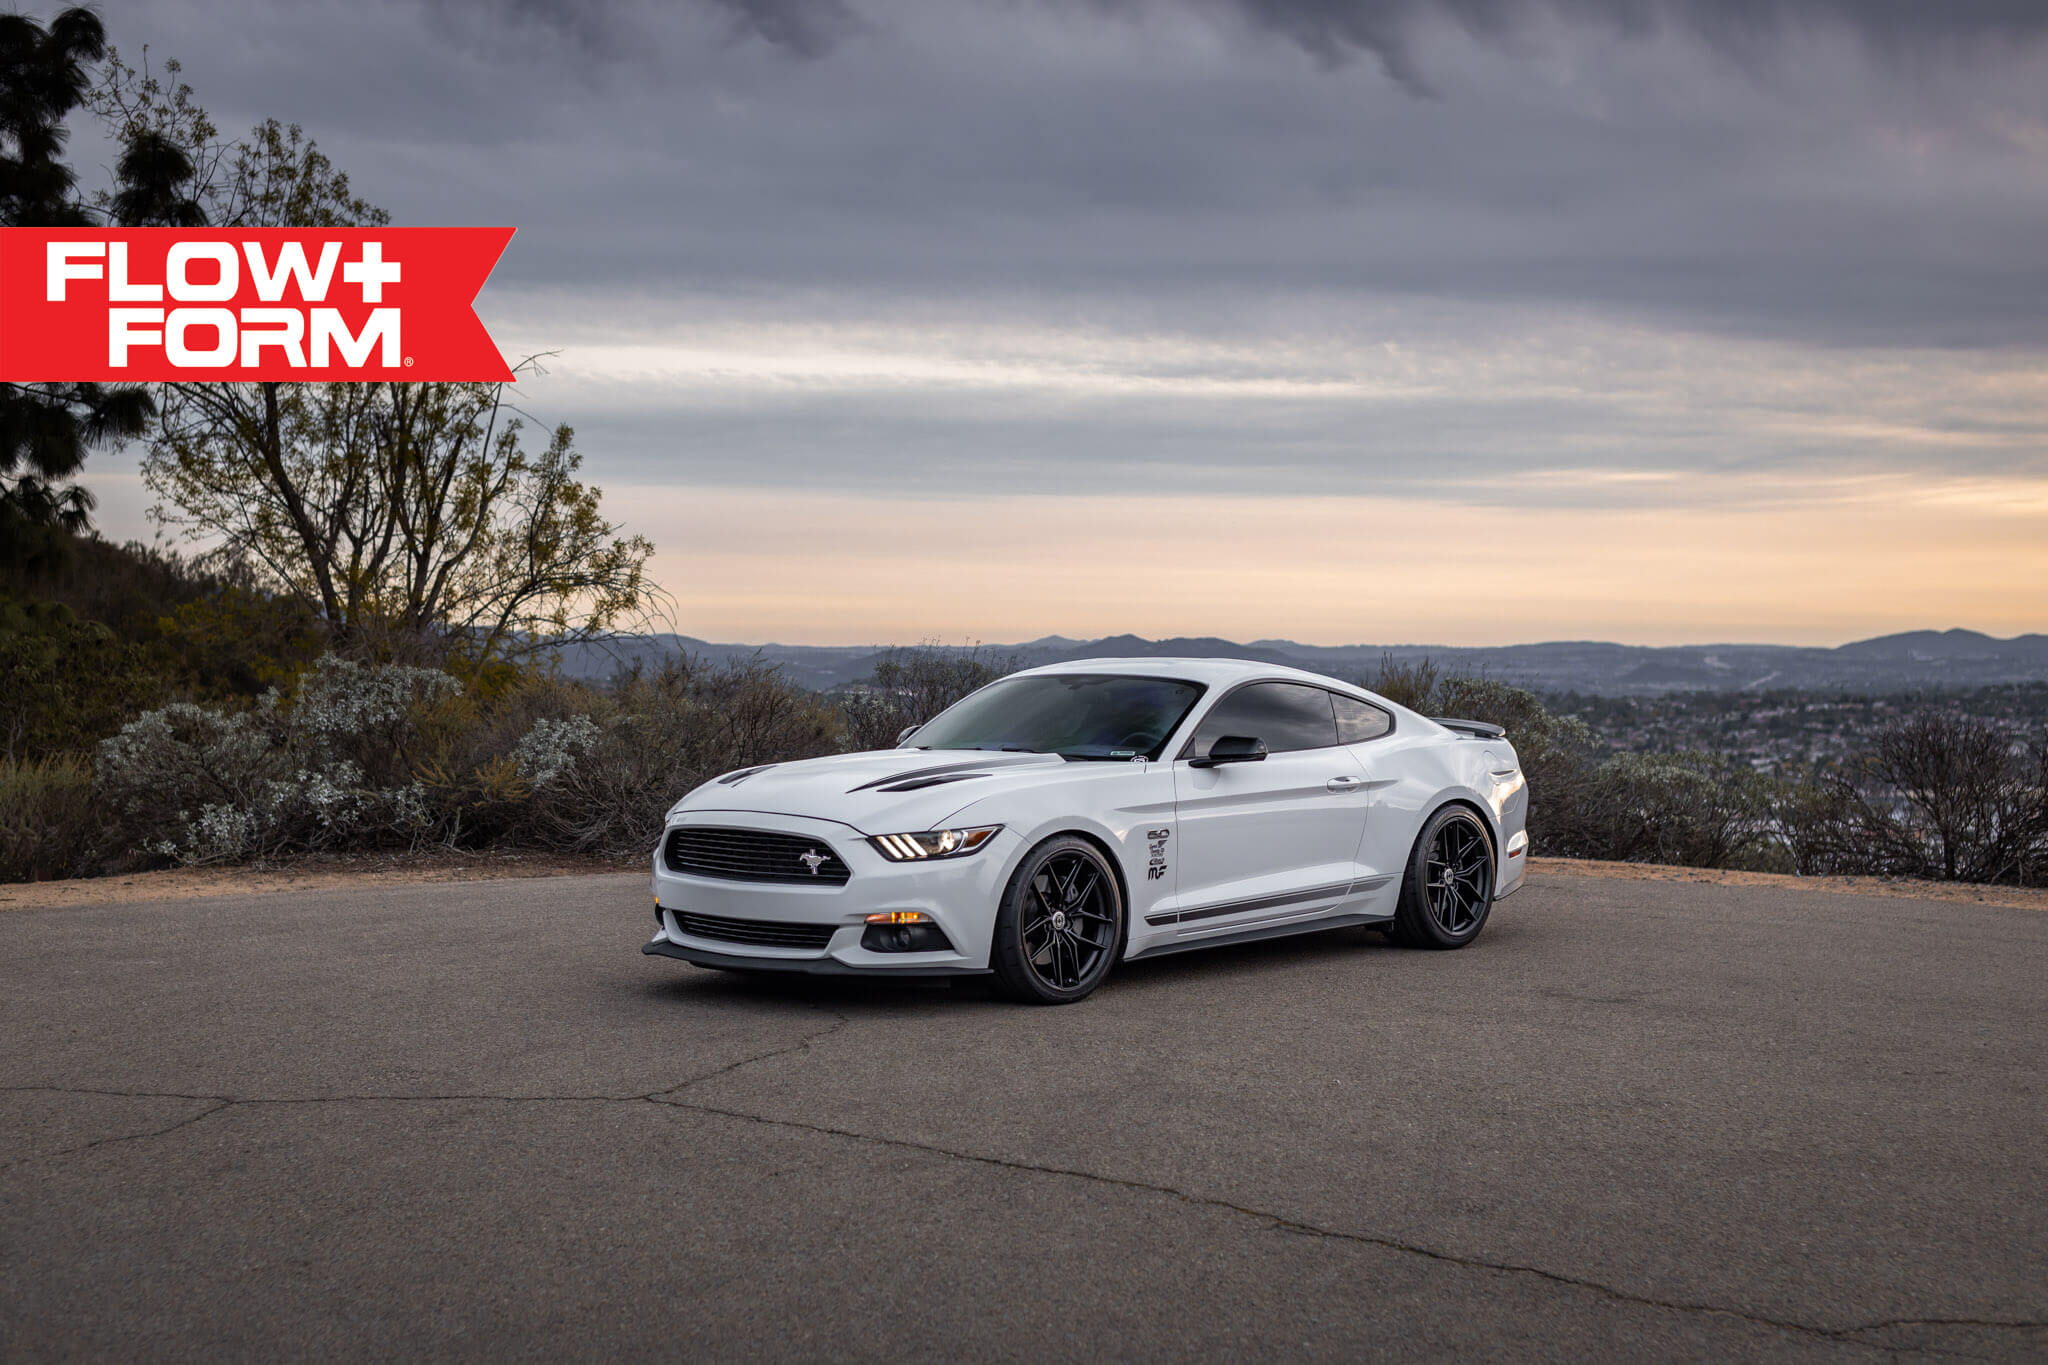 S650 Mustang UP TO $775 OFF on HRE Flow Form Wheels - HRE FF28 FF21 FF11 FF10 FF04 - Vibe Motorsports 9